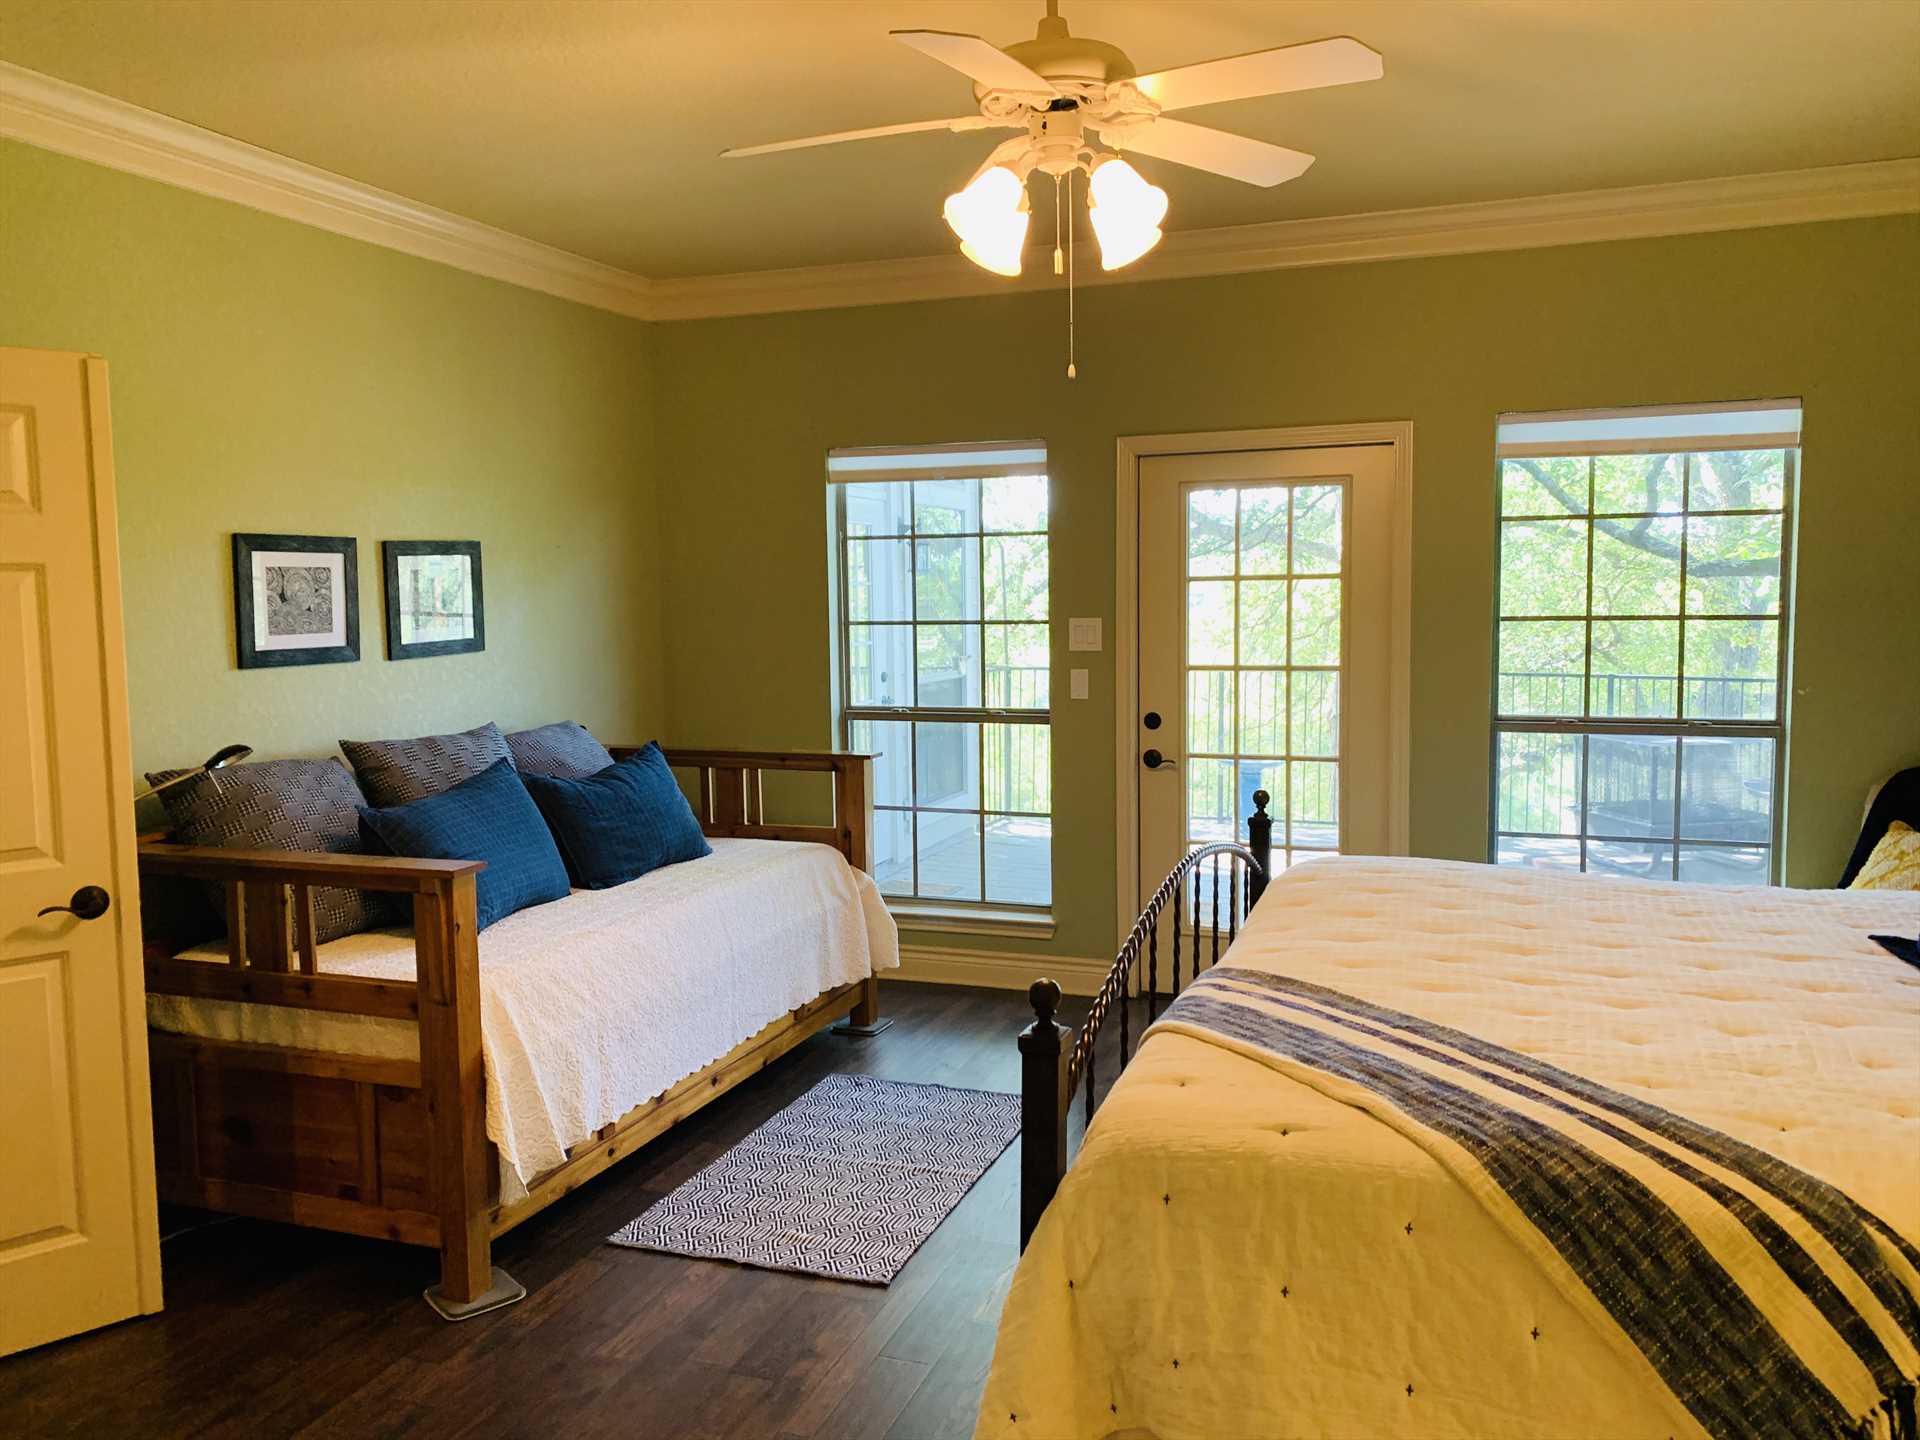                                                 The master bedroom has its own access to the Retreat's outdoor patio (there's also access from the living area).